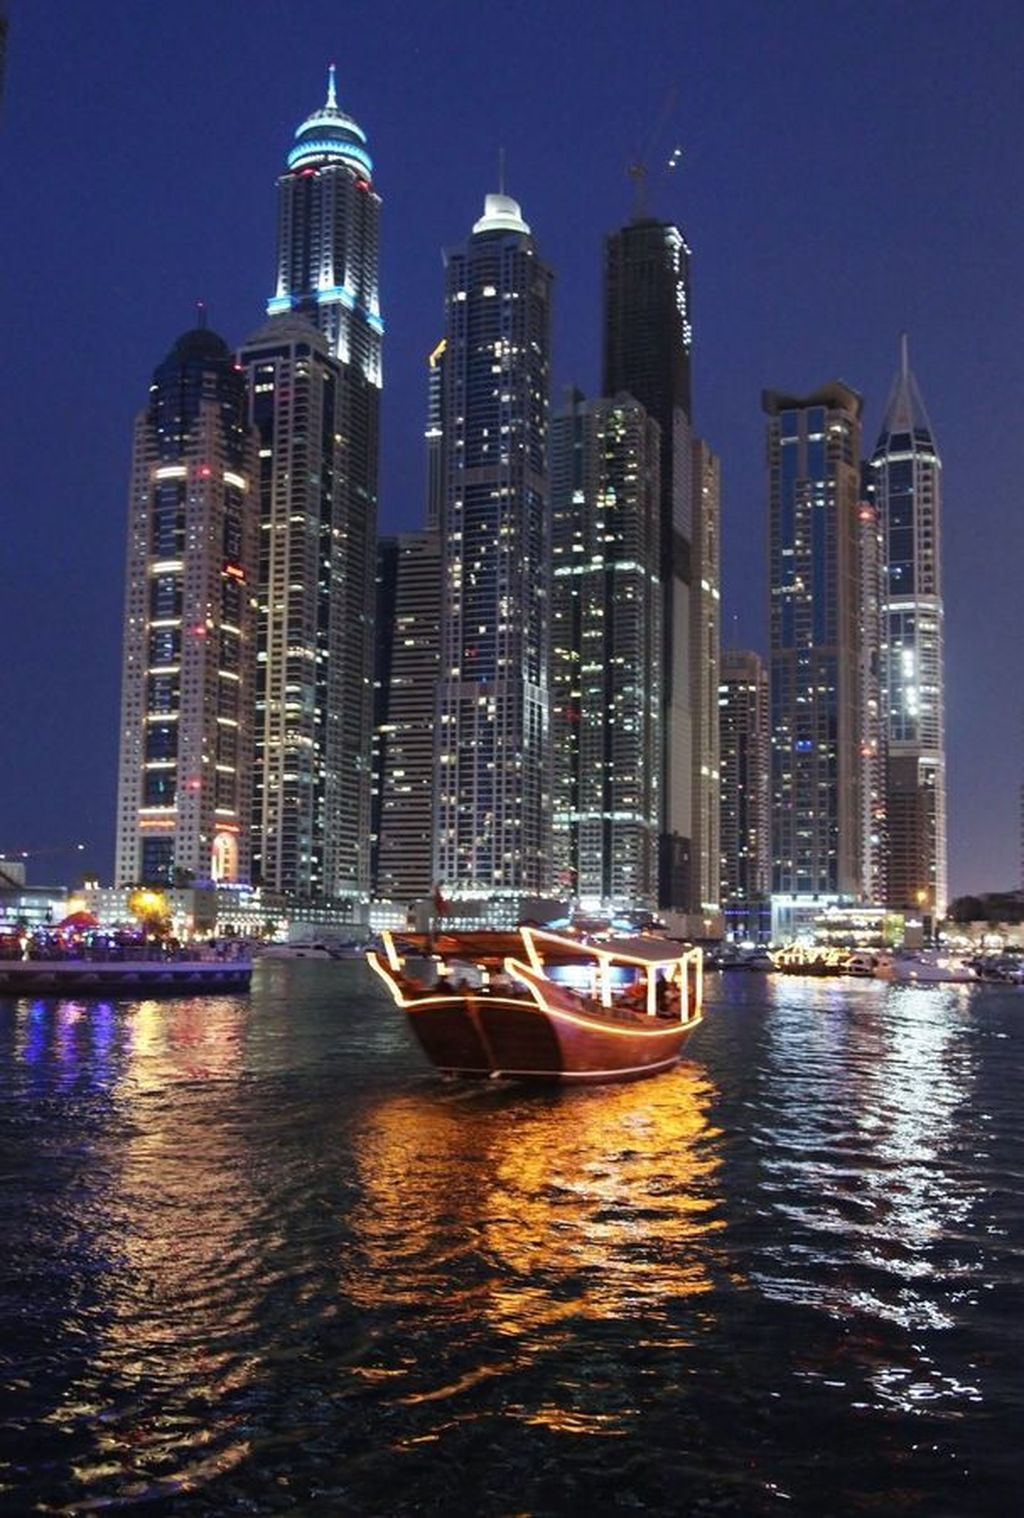 Awesome Photos Of Dubai To Make You Want To Visit It42